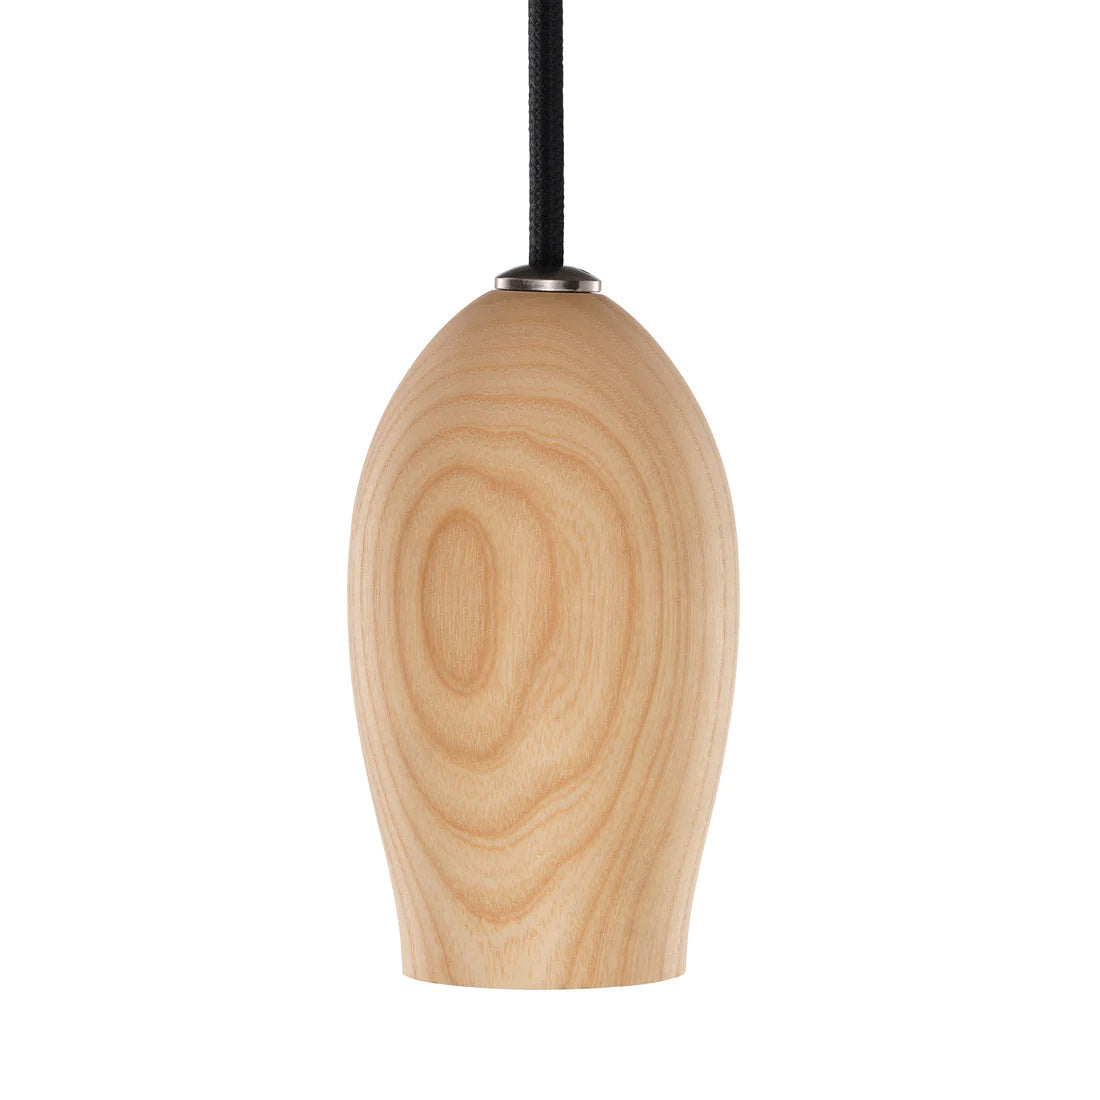 Wood pendant lighting by Well Lit is supplied by South Charlotte Fine Lighting. This particular wood pendant light is shown here in Ash